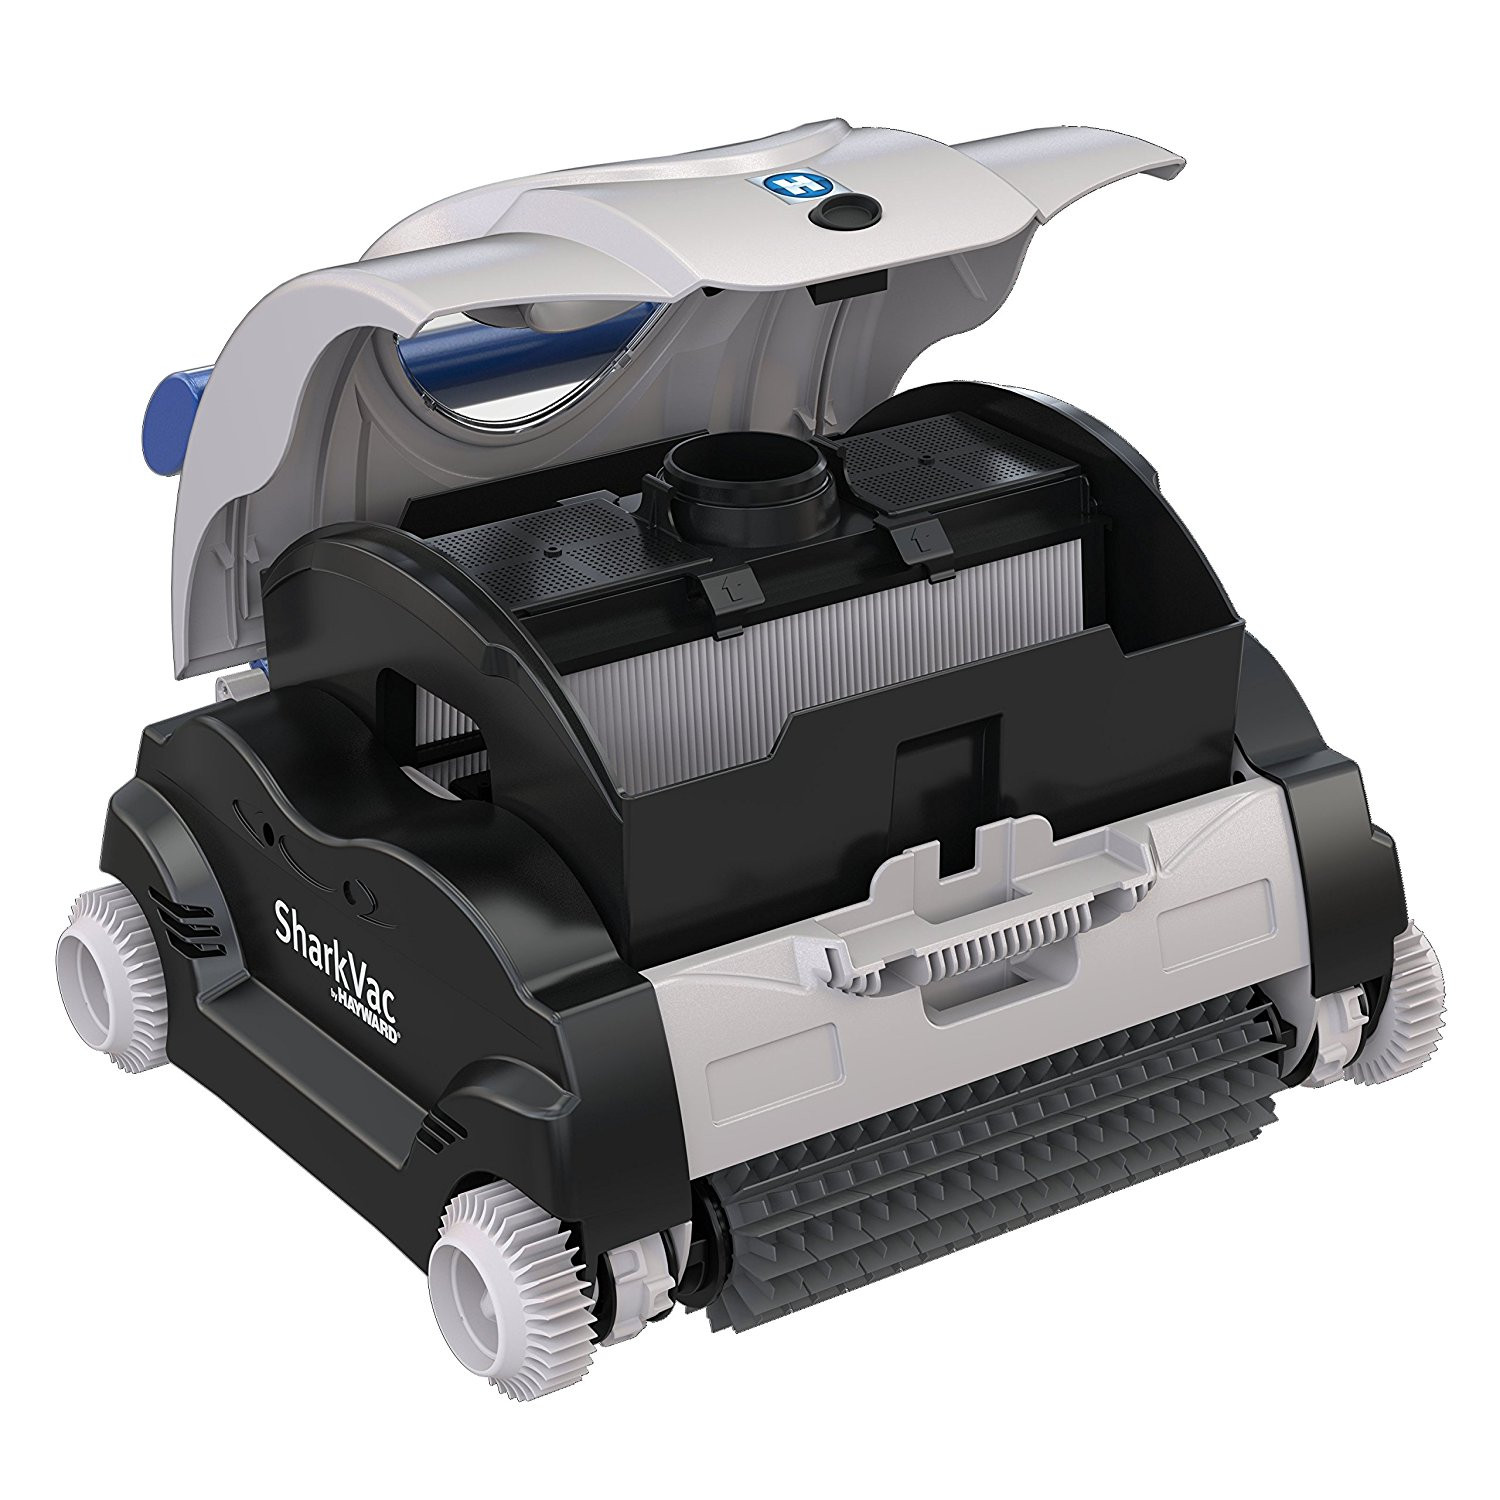 Above Ground Robotic Pool Cleaner
 The 4 Best Robotic Pool Cleaners for Ground Pools